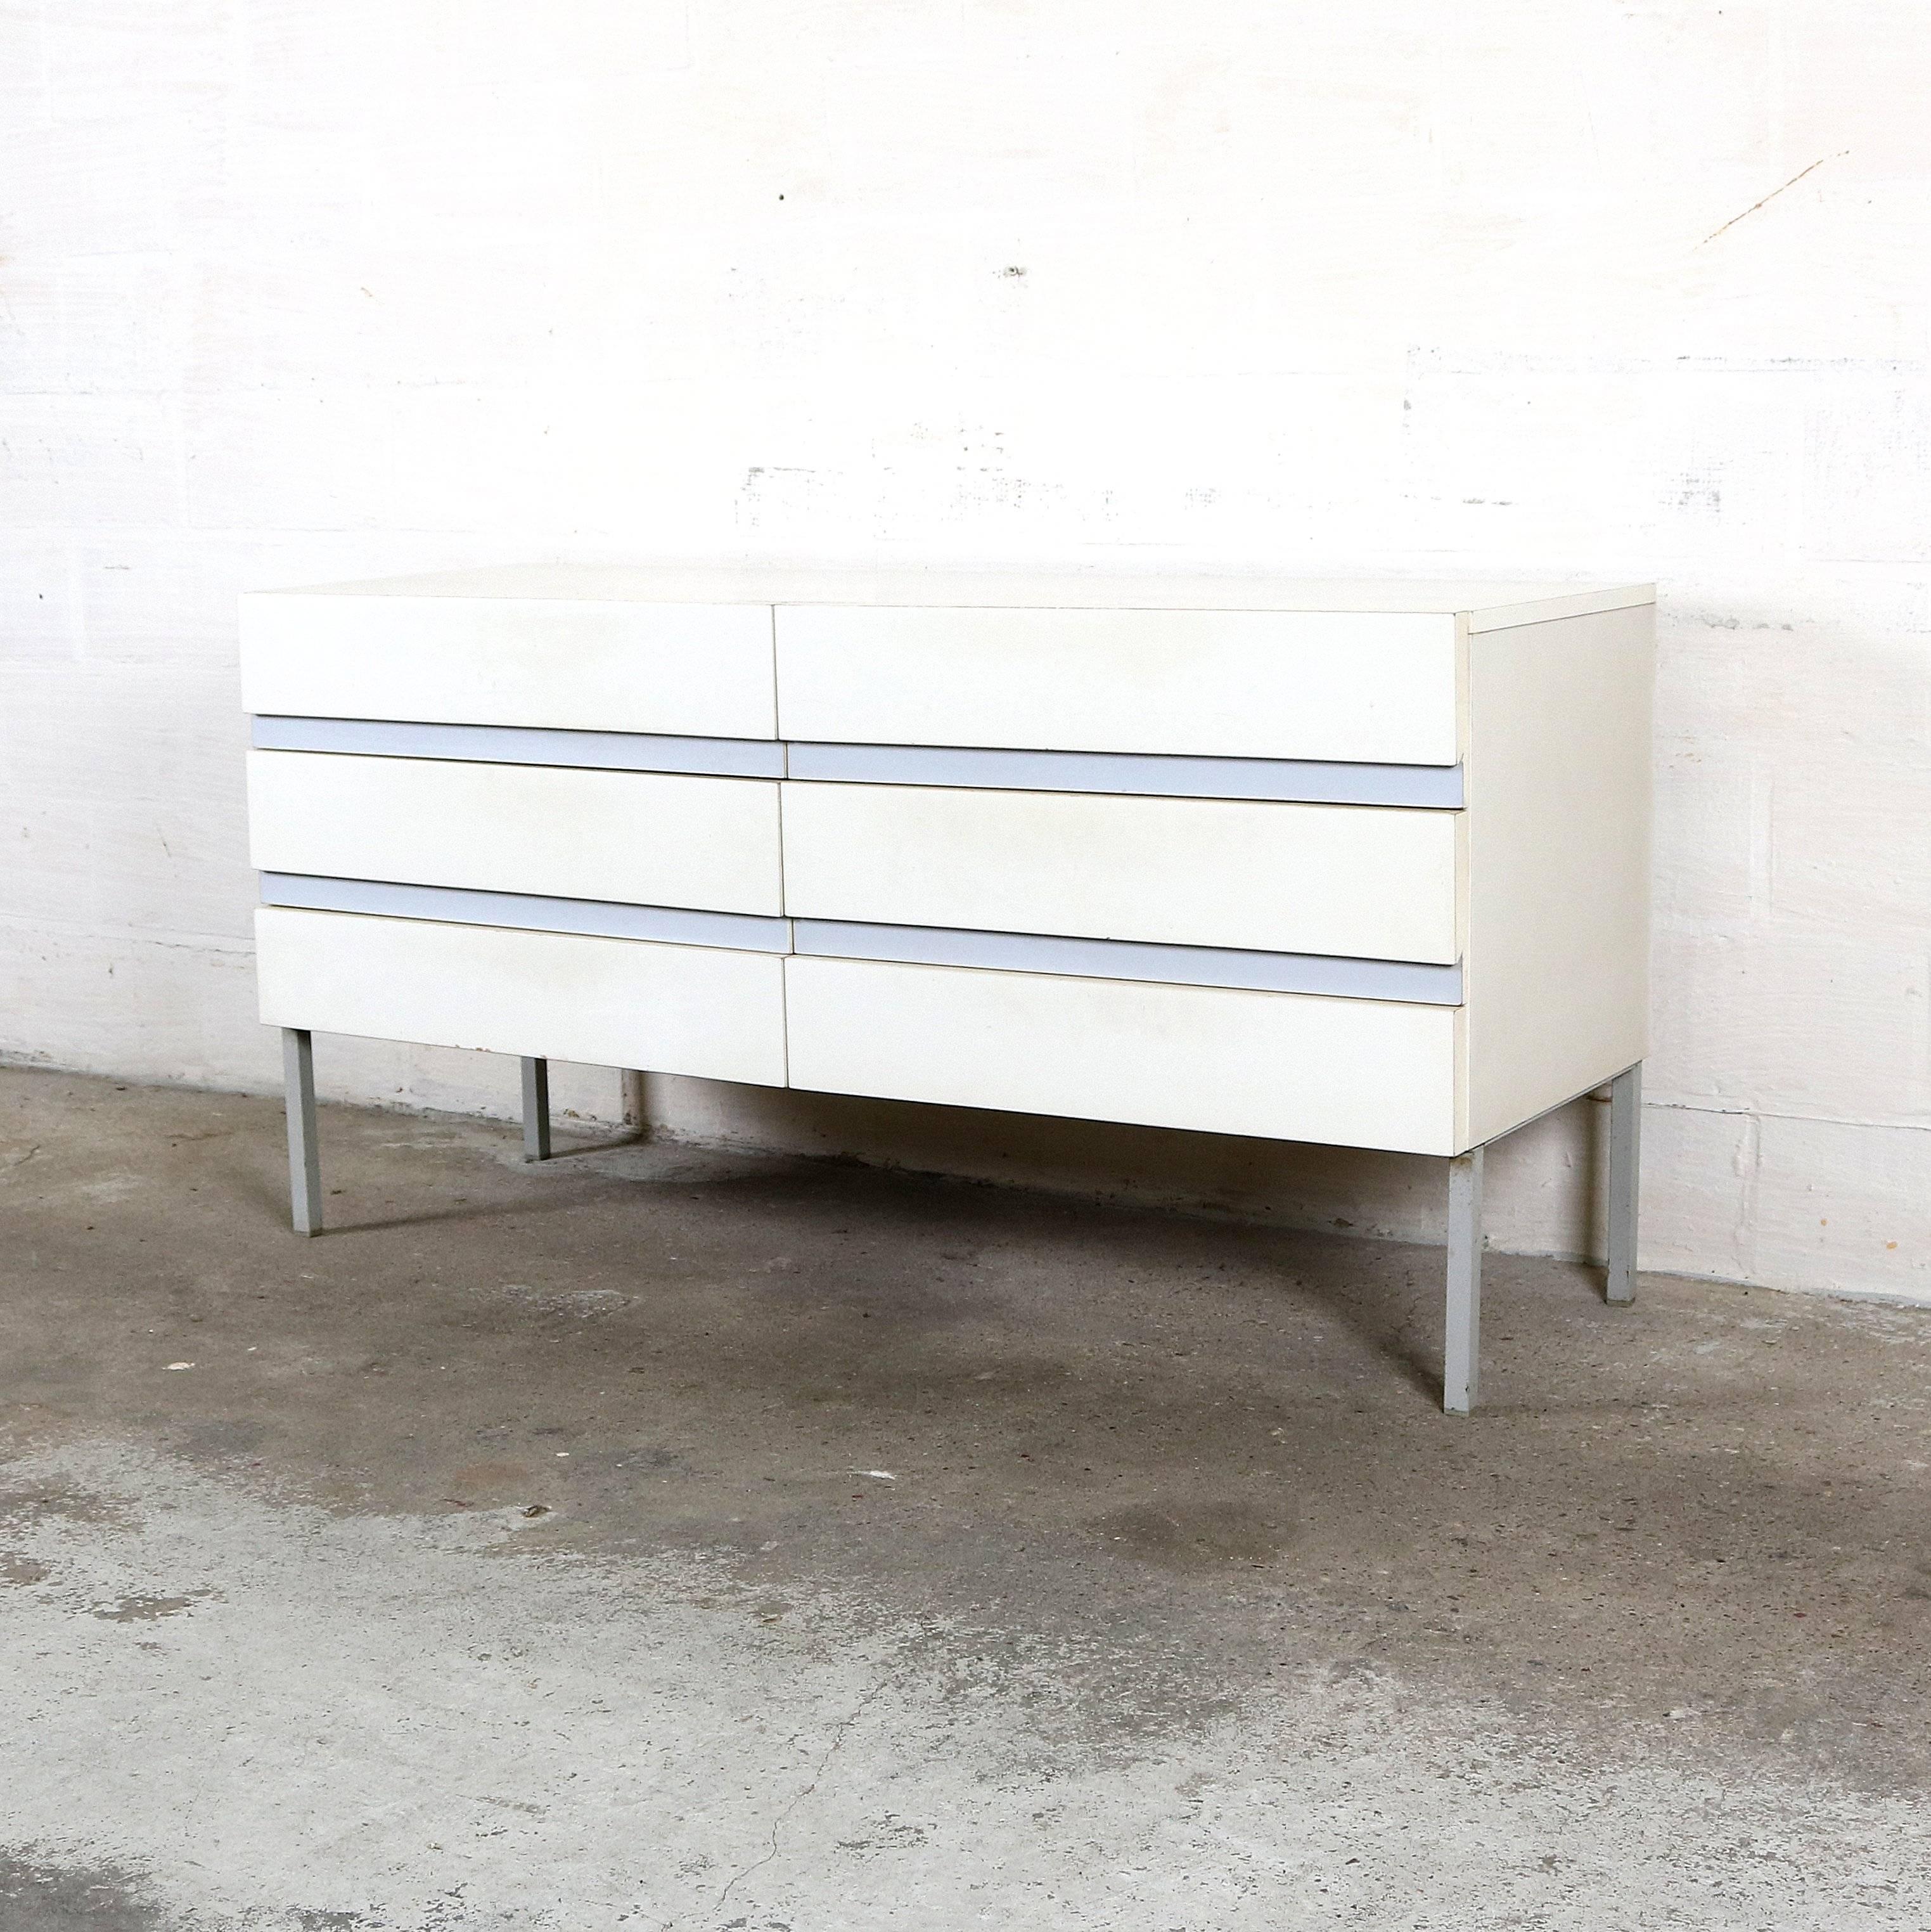 Chest of drawers by the brand Interlübke.
Made of high quality white formica.
Has a nice clean look.